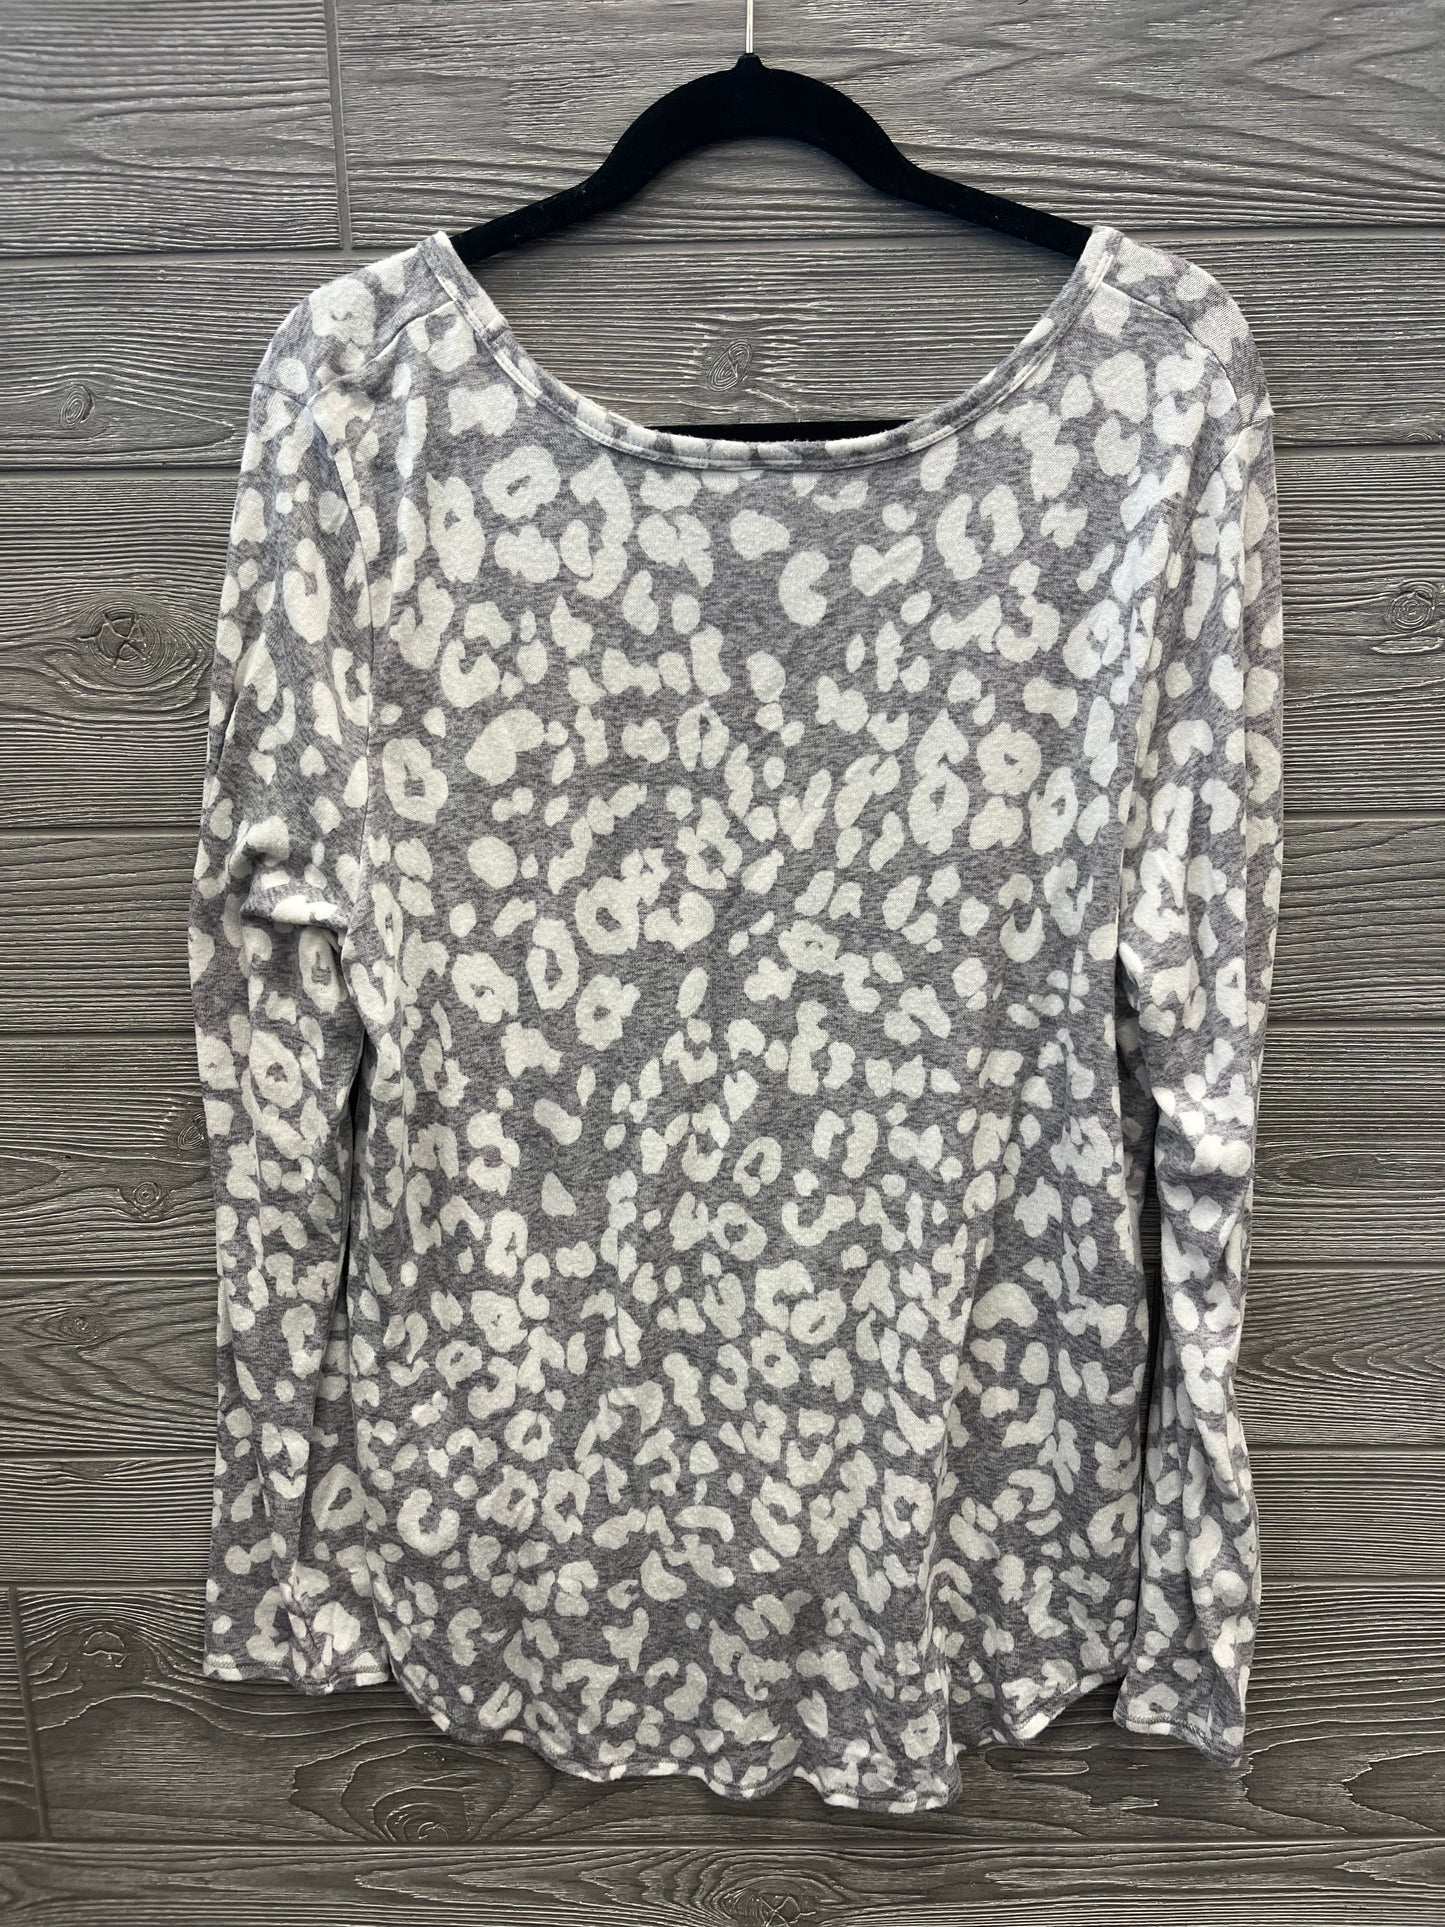 Animal Print Top Long Sleeve Old Navy, Size Xl